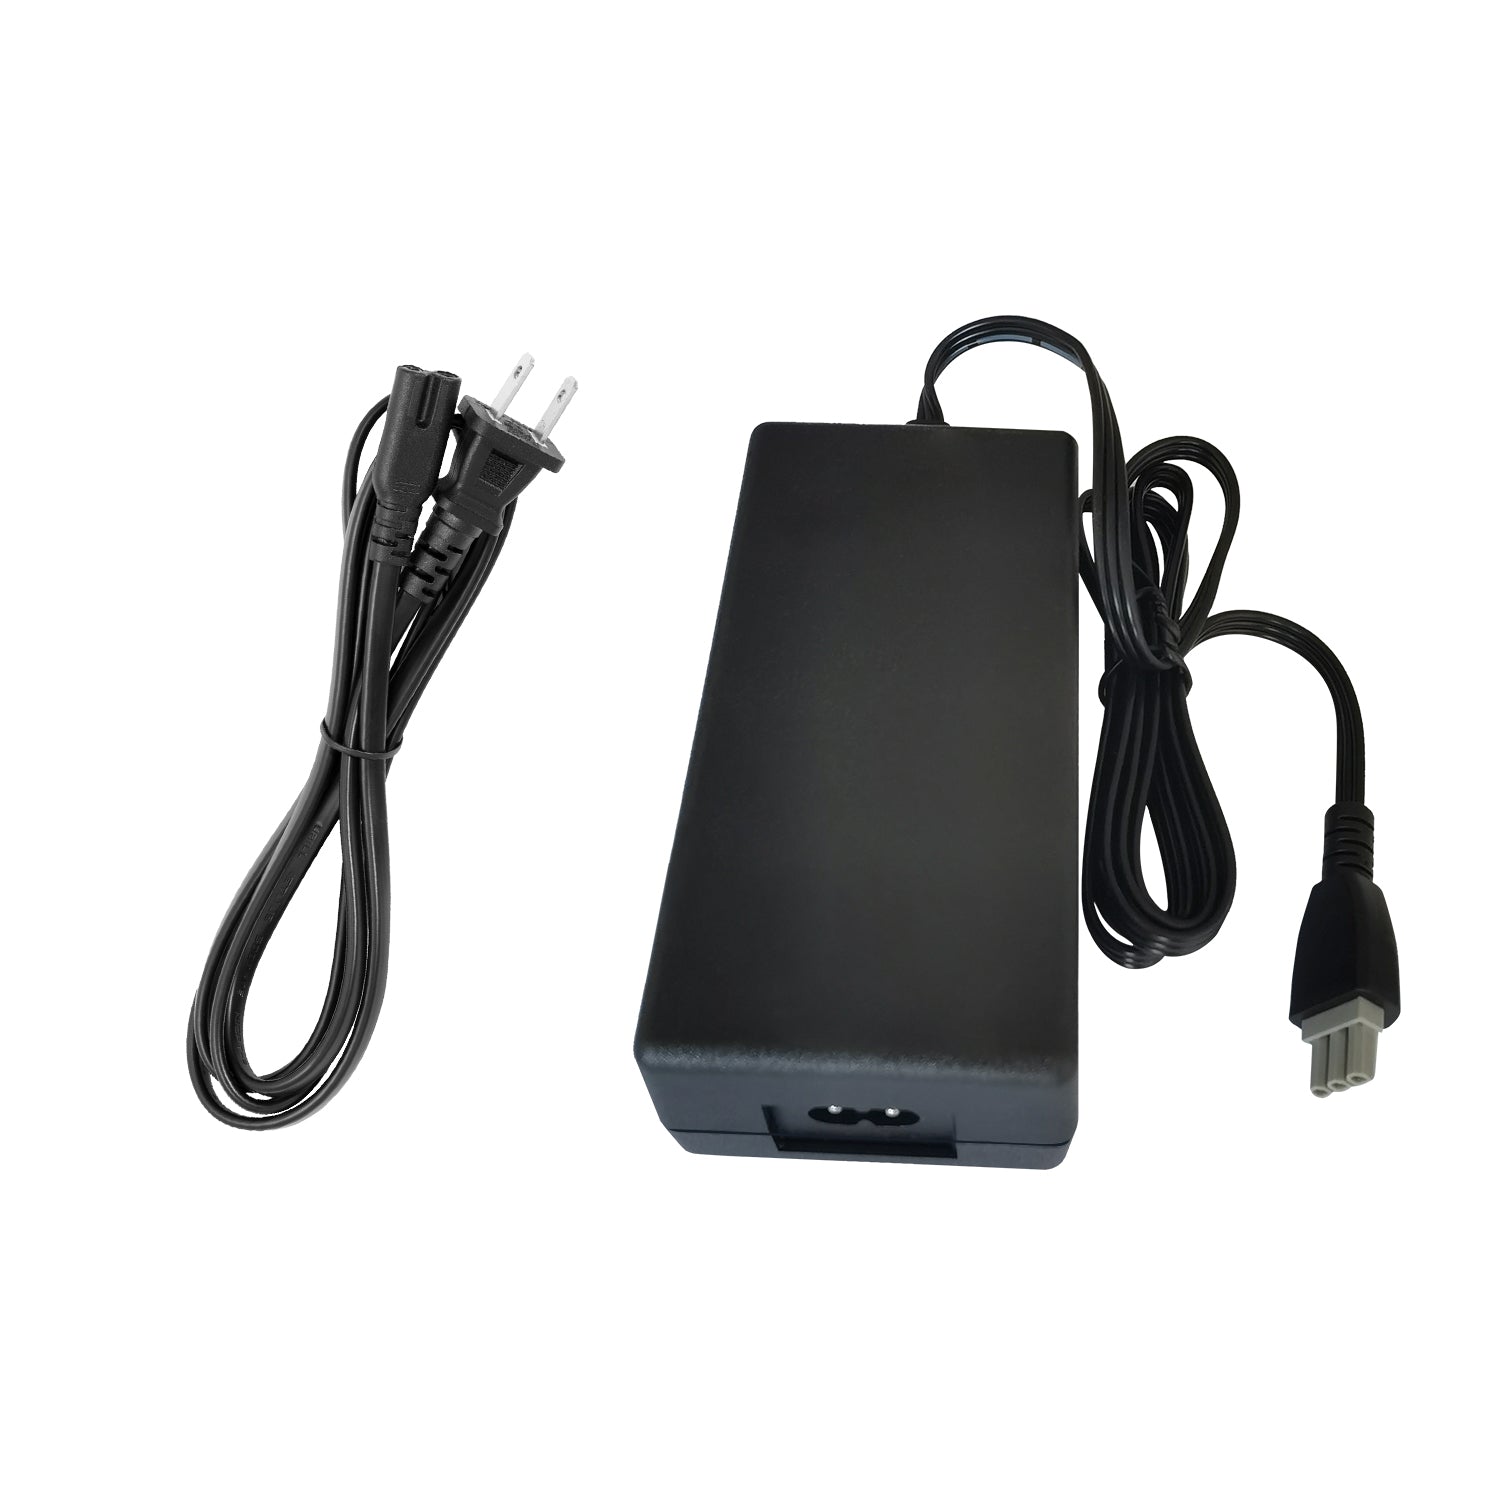 Power Adapter for hp psc q5881a Printer.